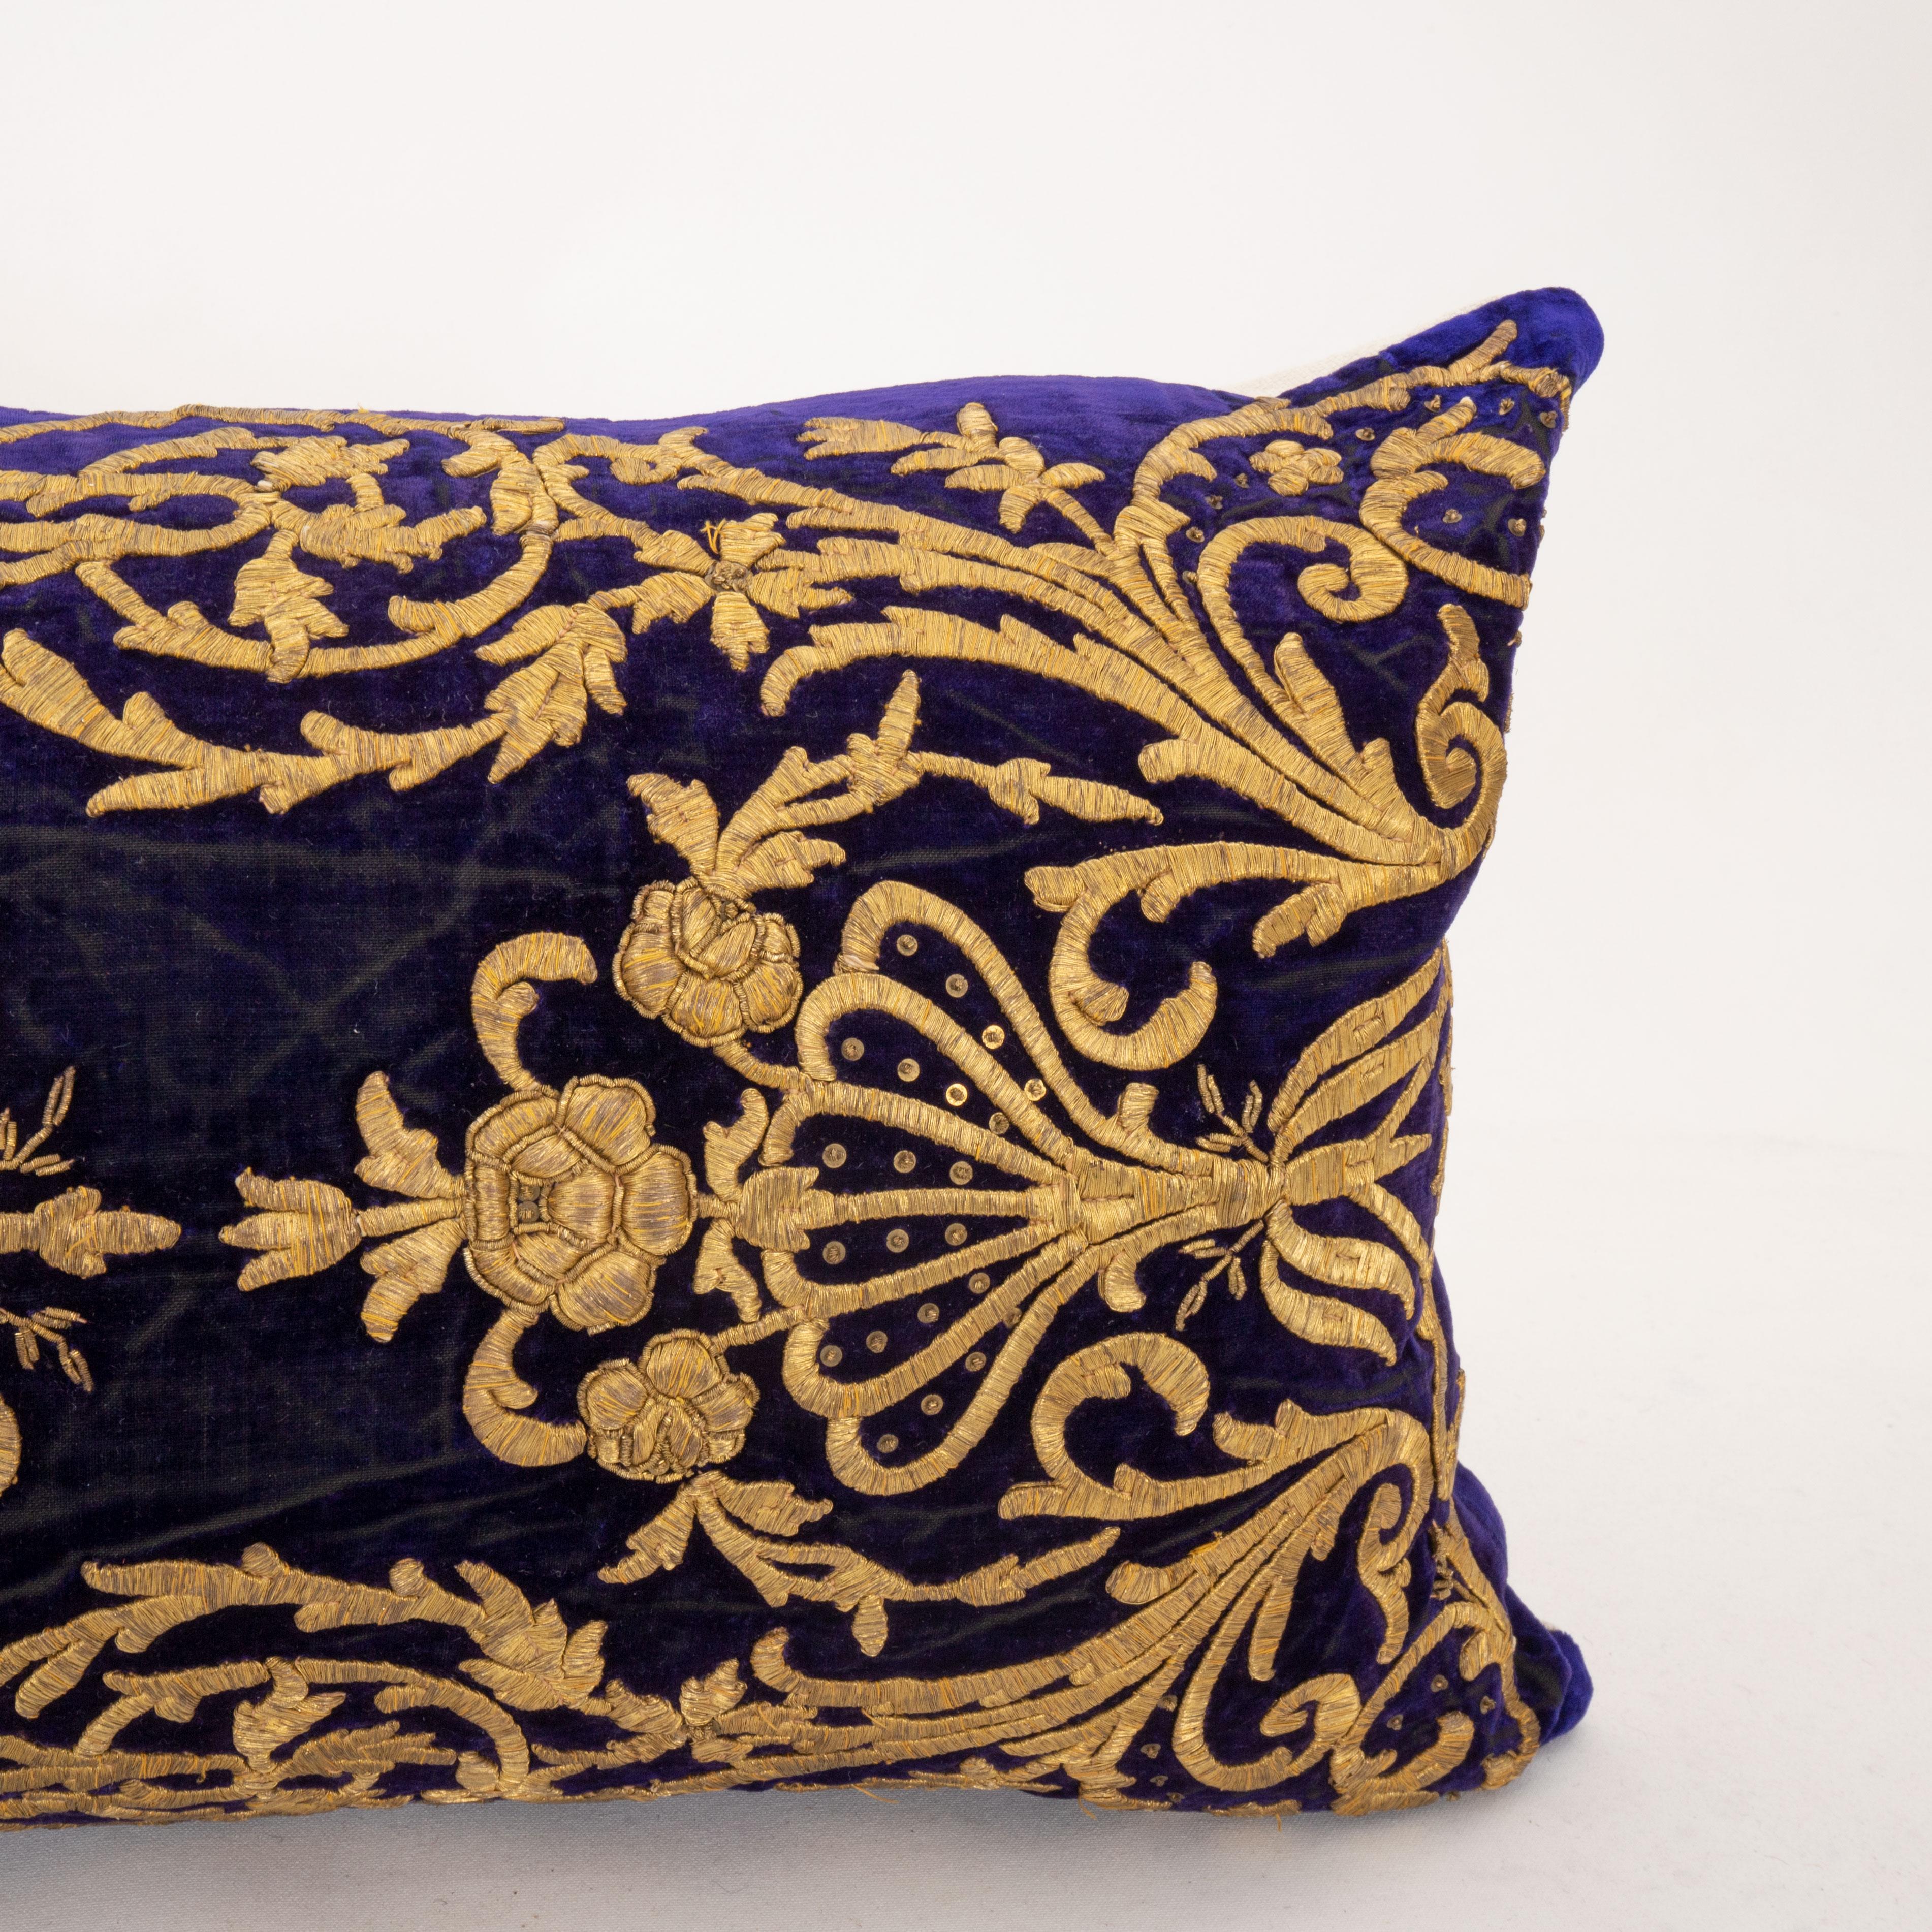 20th Century Ottoman / Turkish Pillow Cover in Sarma Technique, late 19th / Early 20th C. For Sale